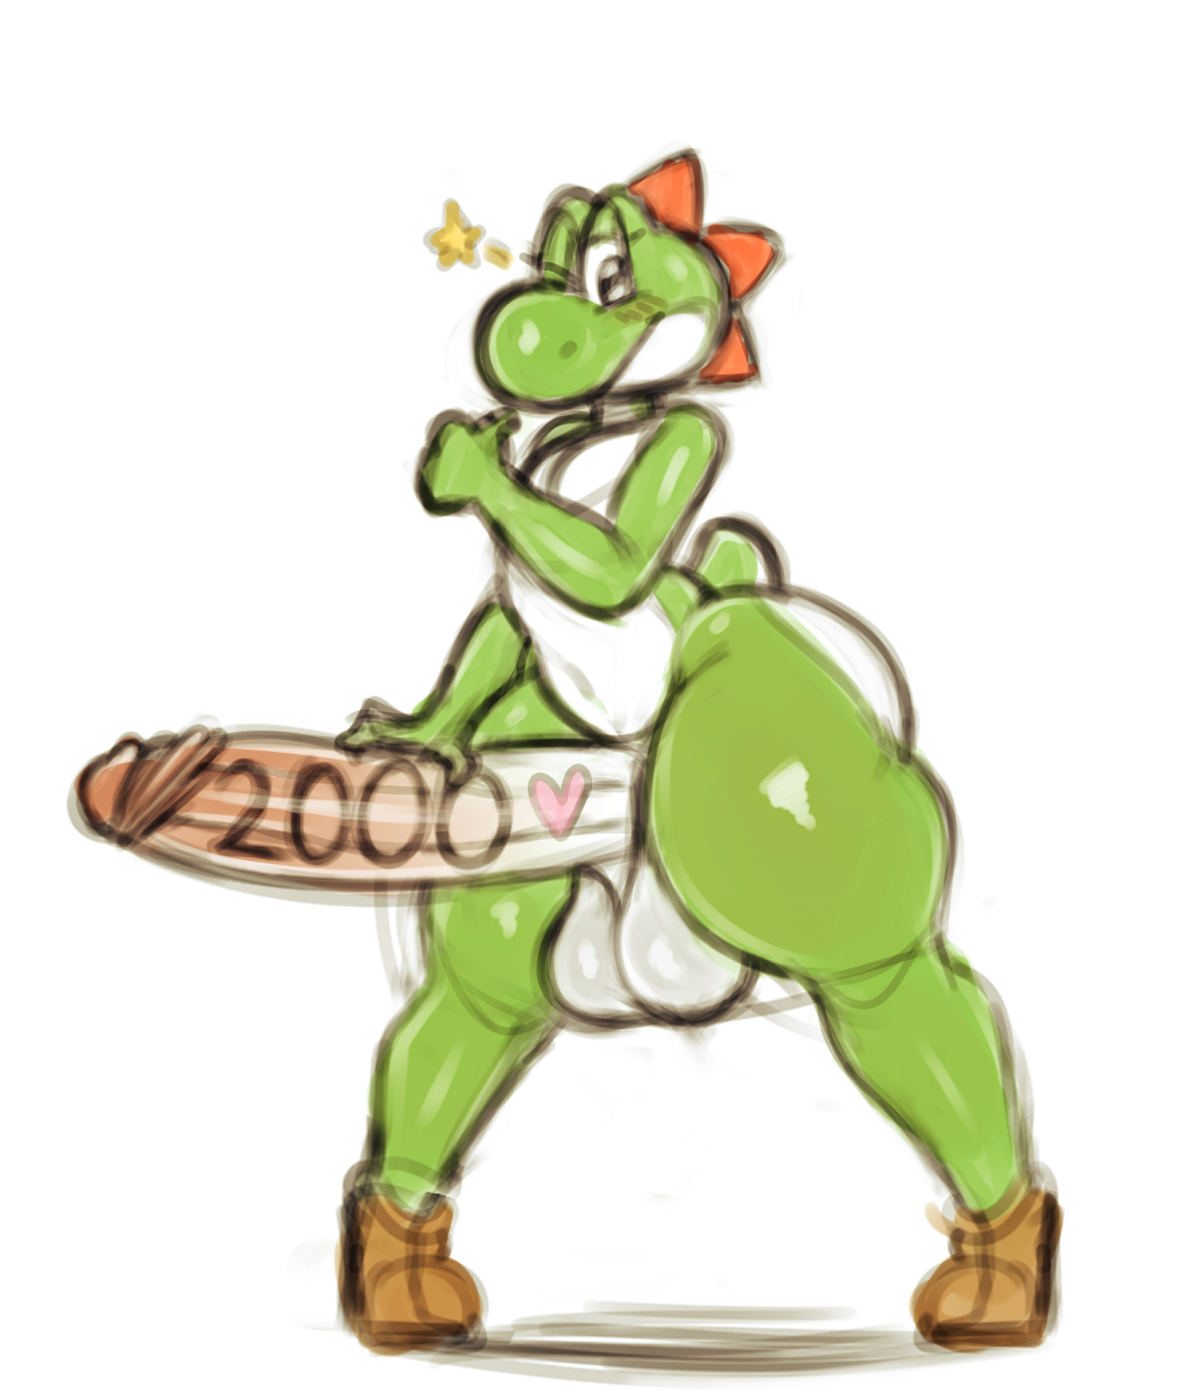 “On this special occasion, Yoshi wants to show you something special of his...